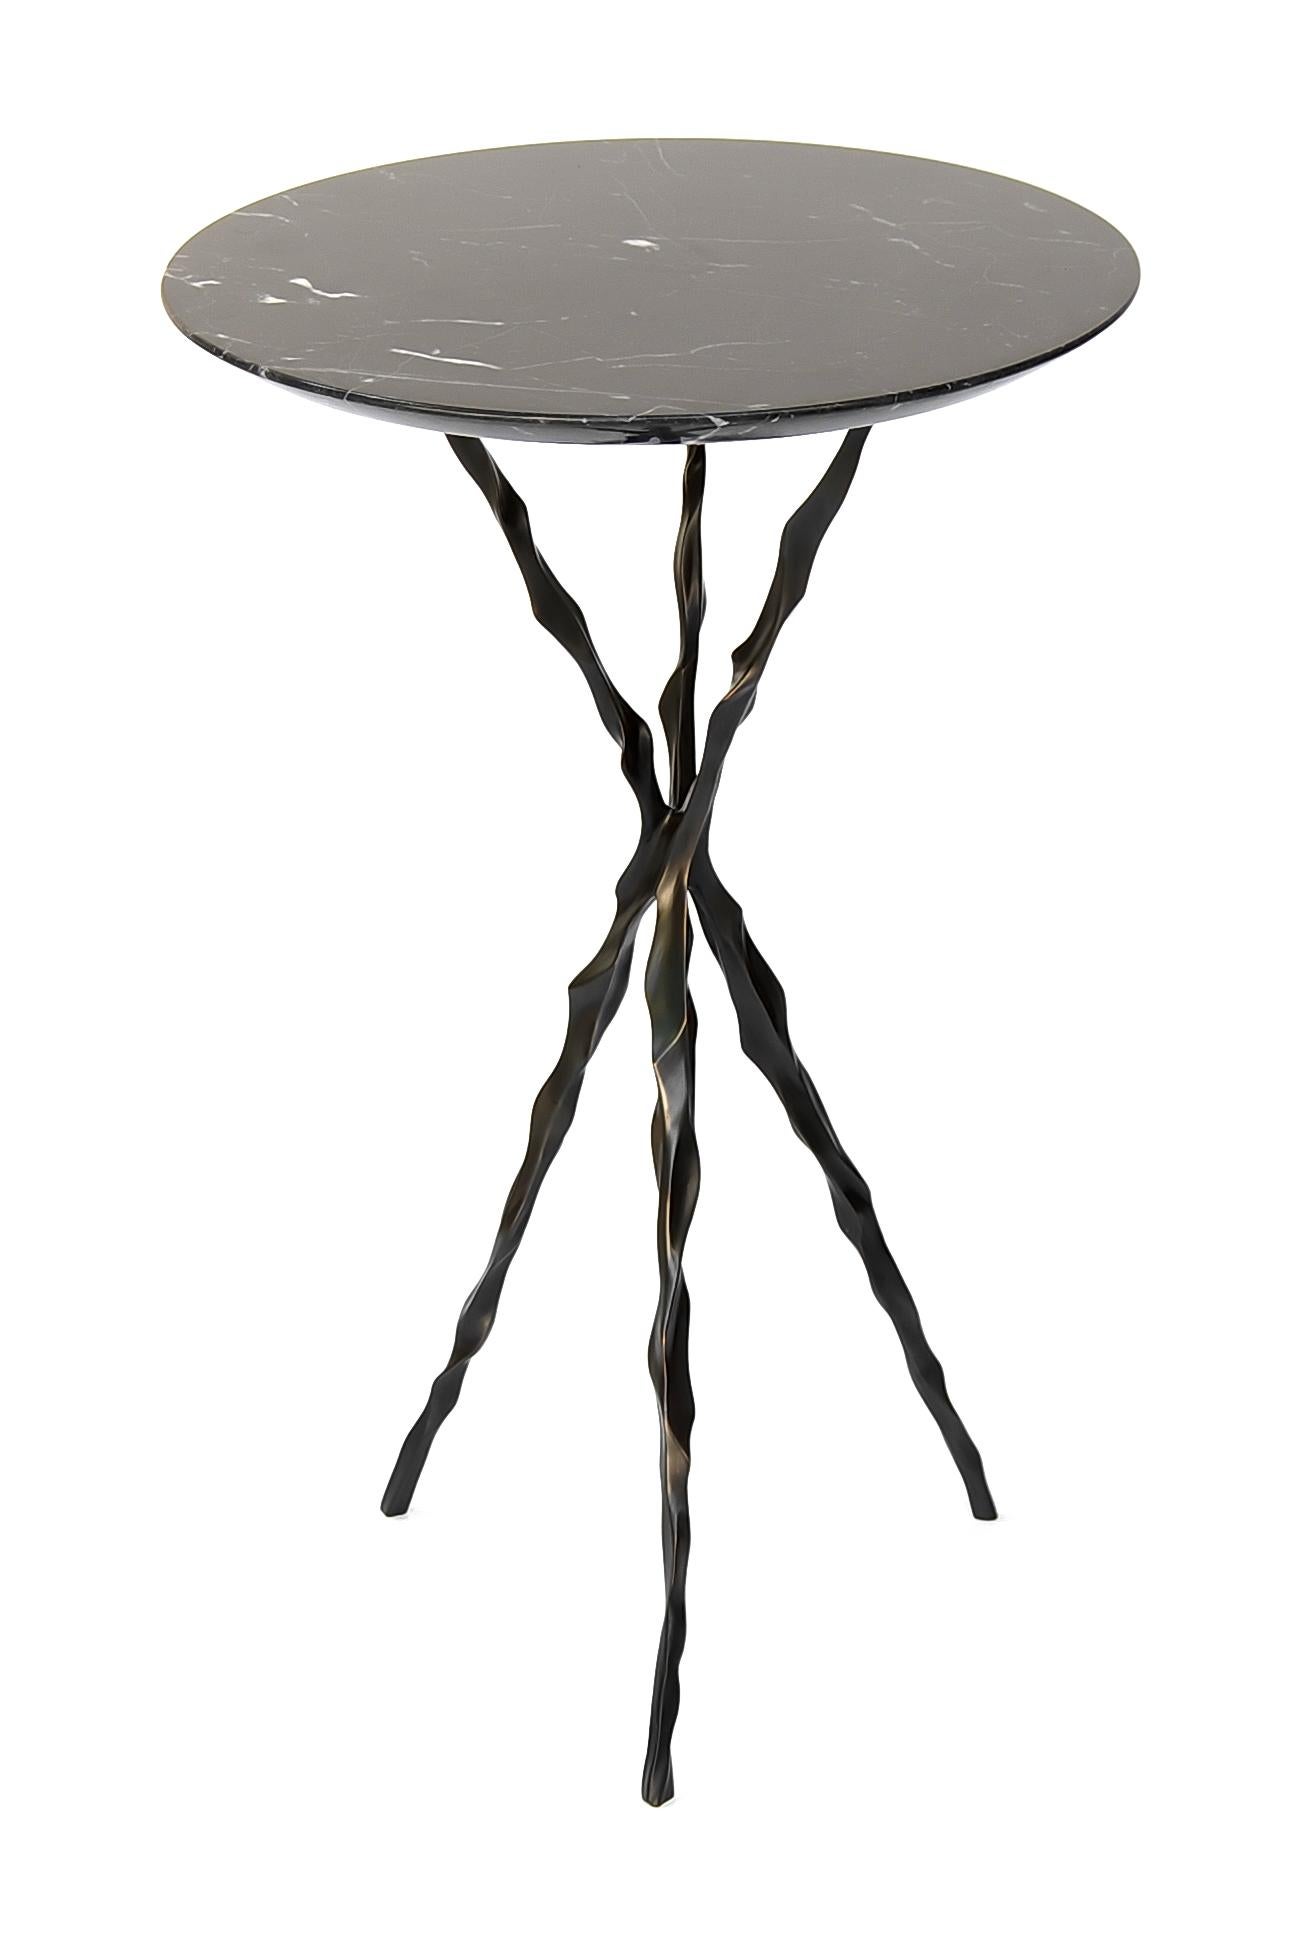 Thom drink table with Nero Marquina Marble top by Fakasaka Design
Dimensions: W 40 cm, D 40 cm, H 62 cm.
Materials: dark bronze base, Nero Marquina marble.
 
Also available in different table top materials:
Nero Marquina Marble 
Translucent